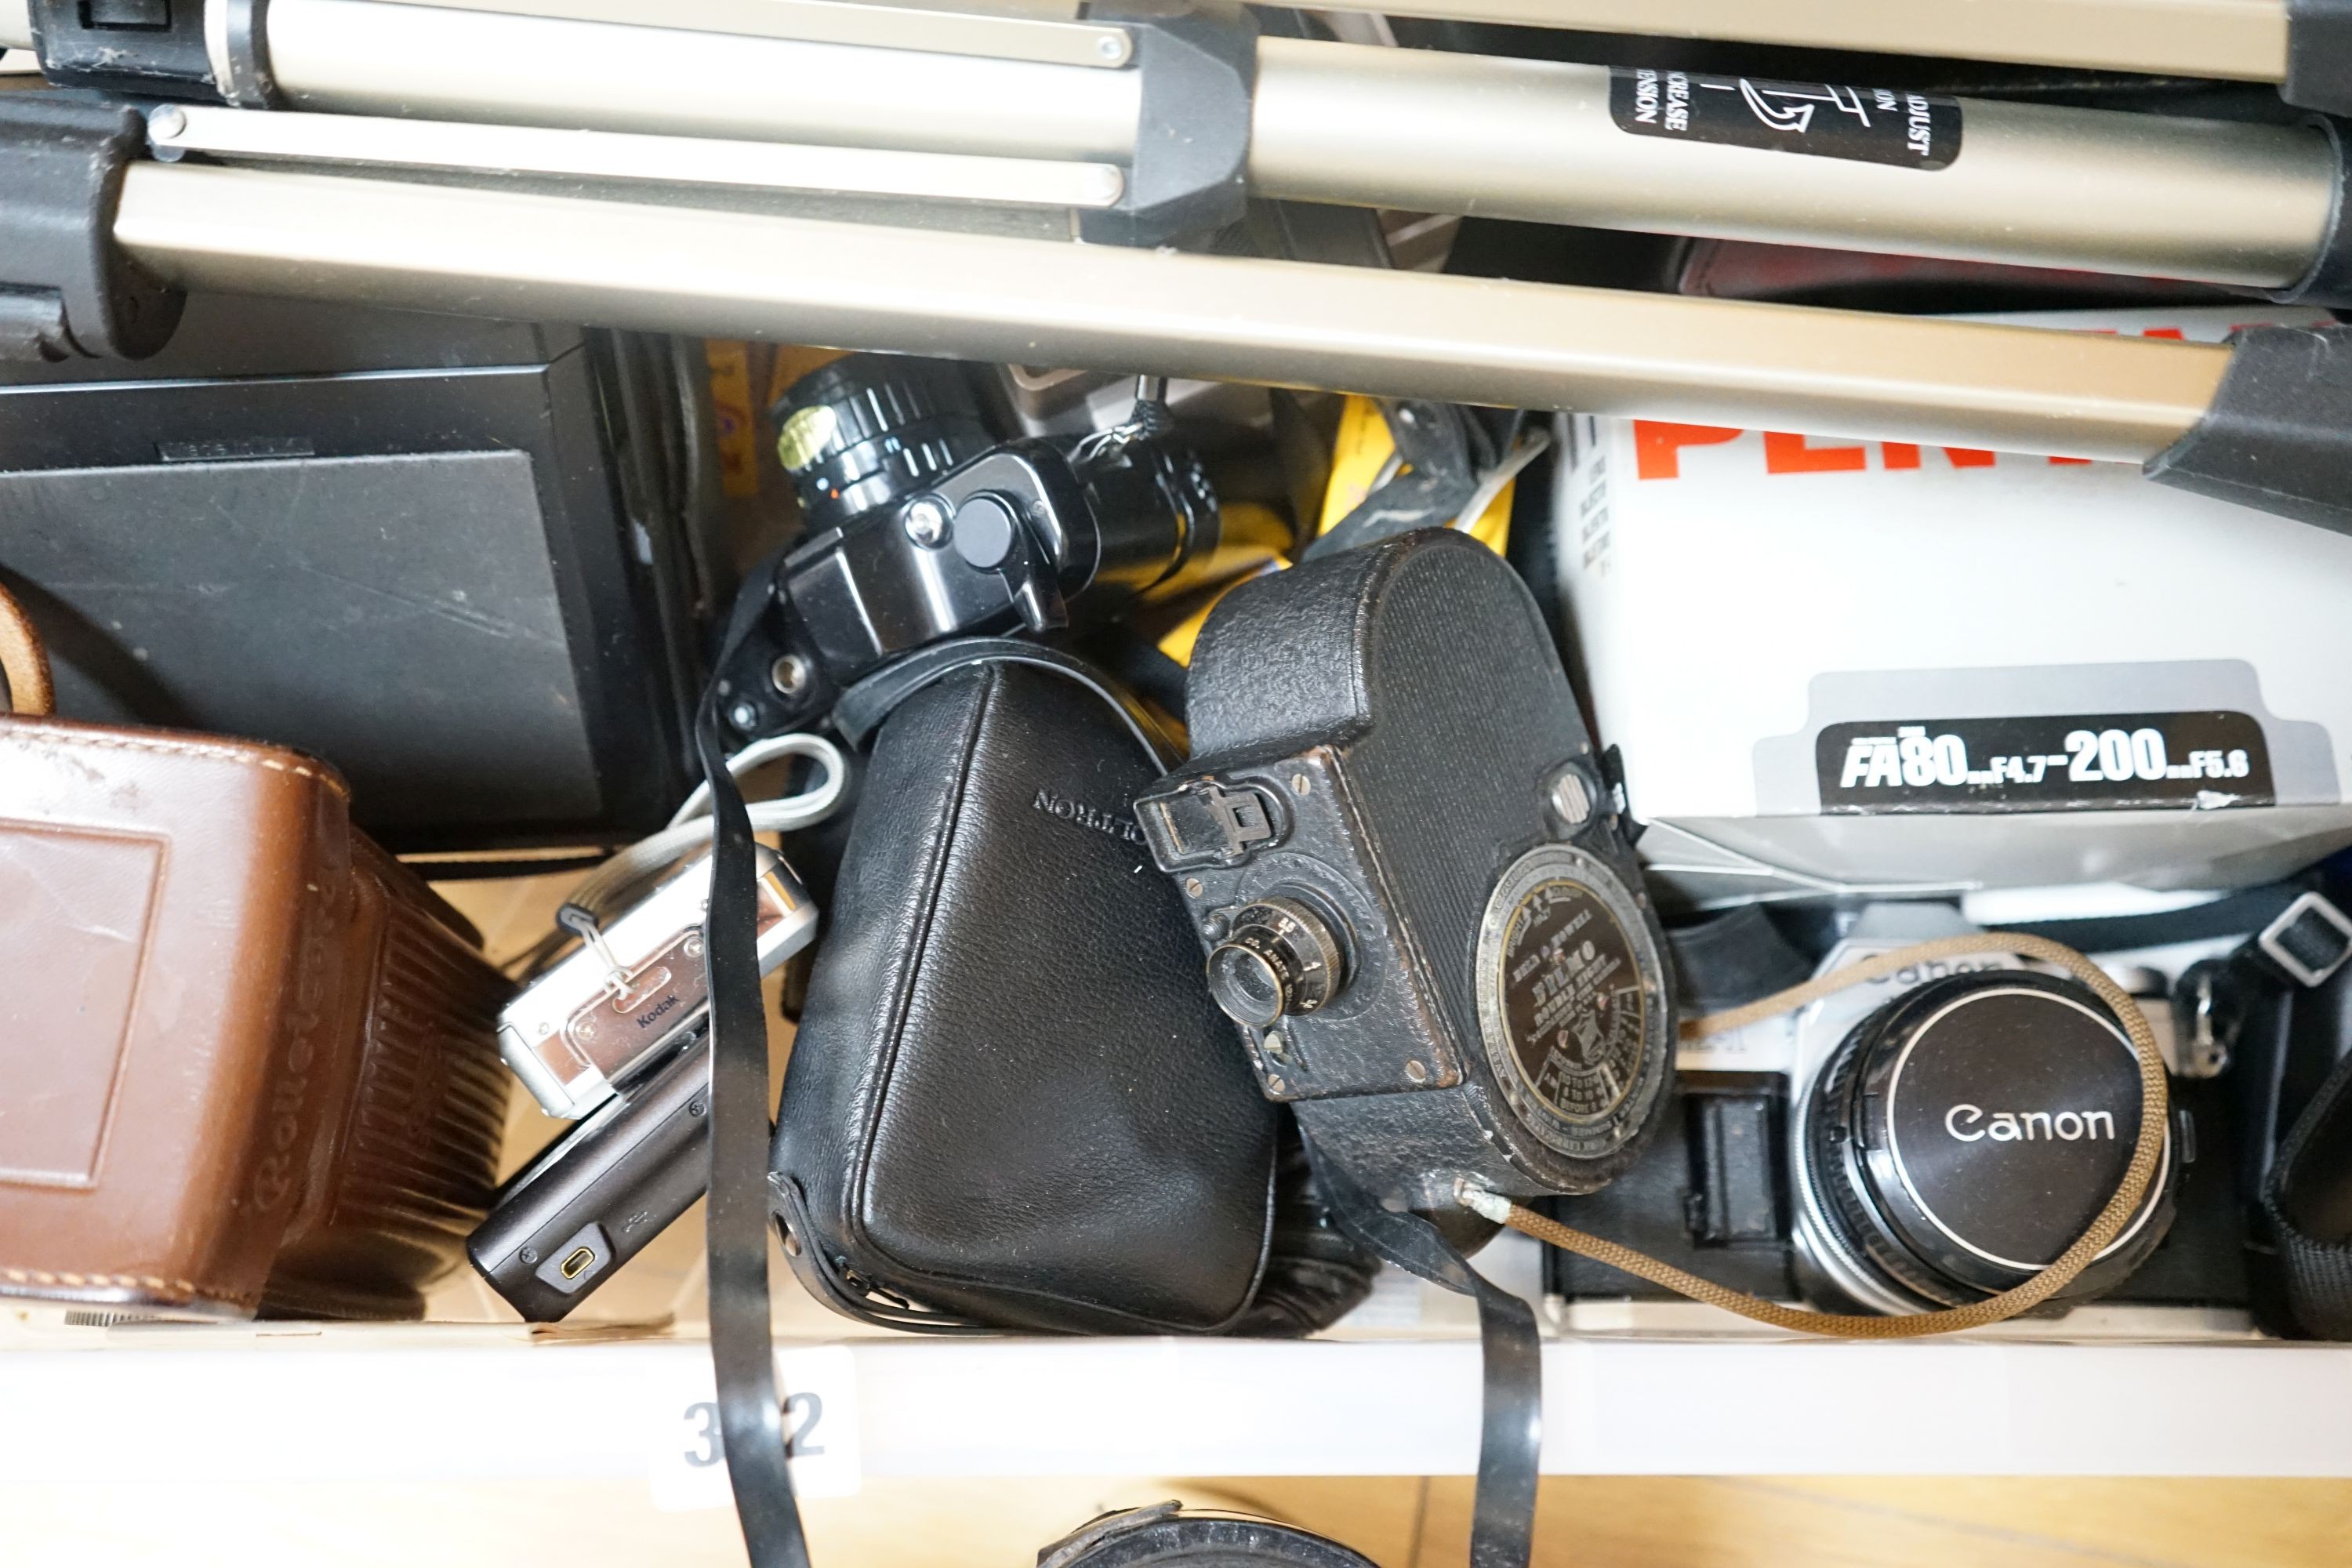 A collection of cameras and camera equipment